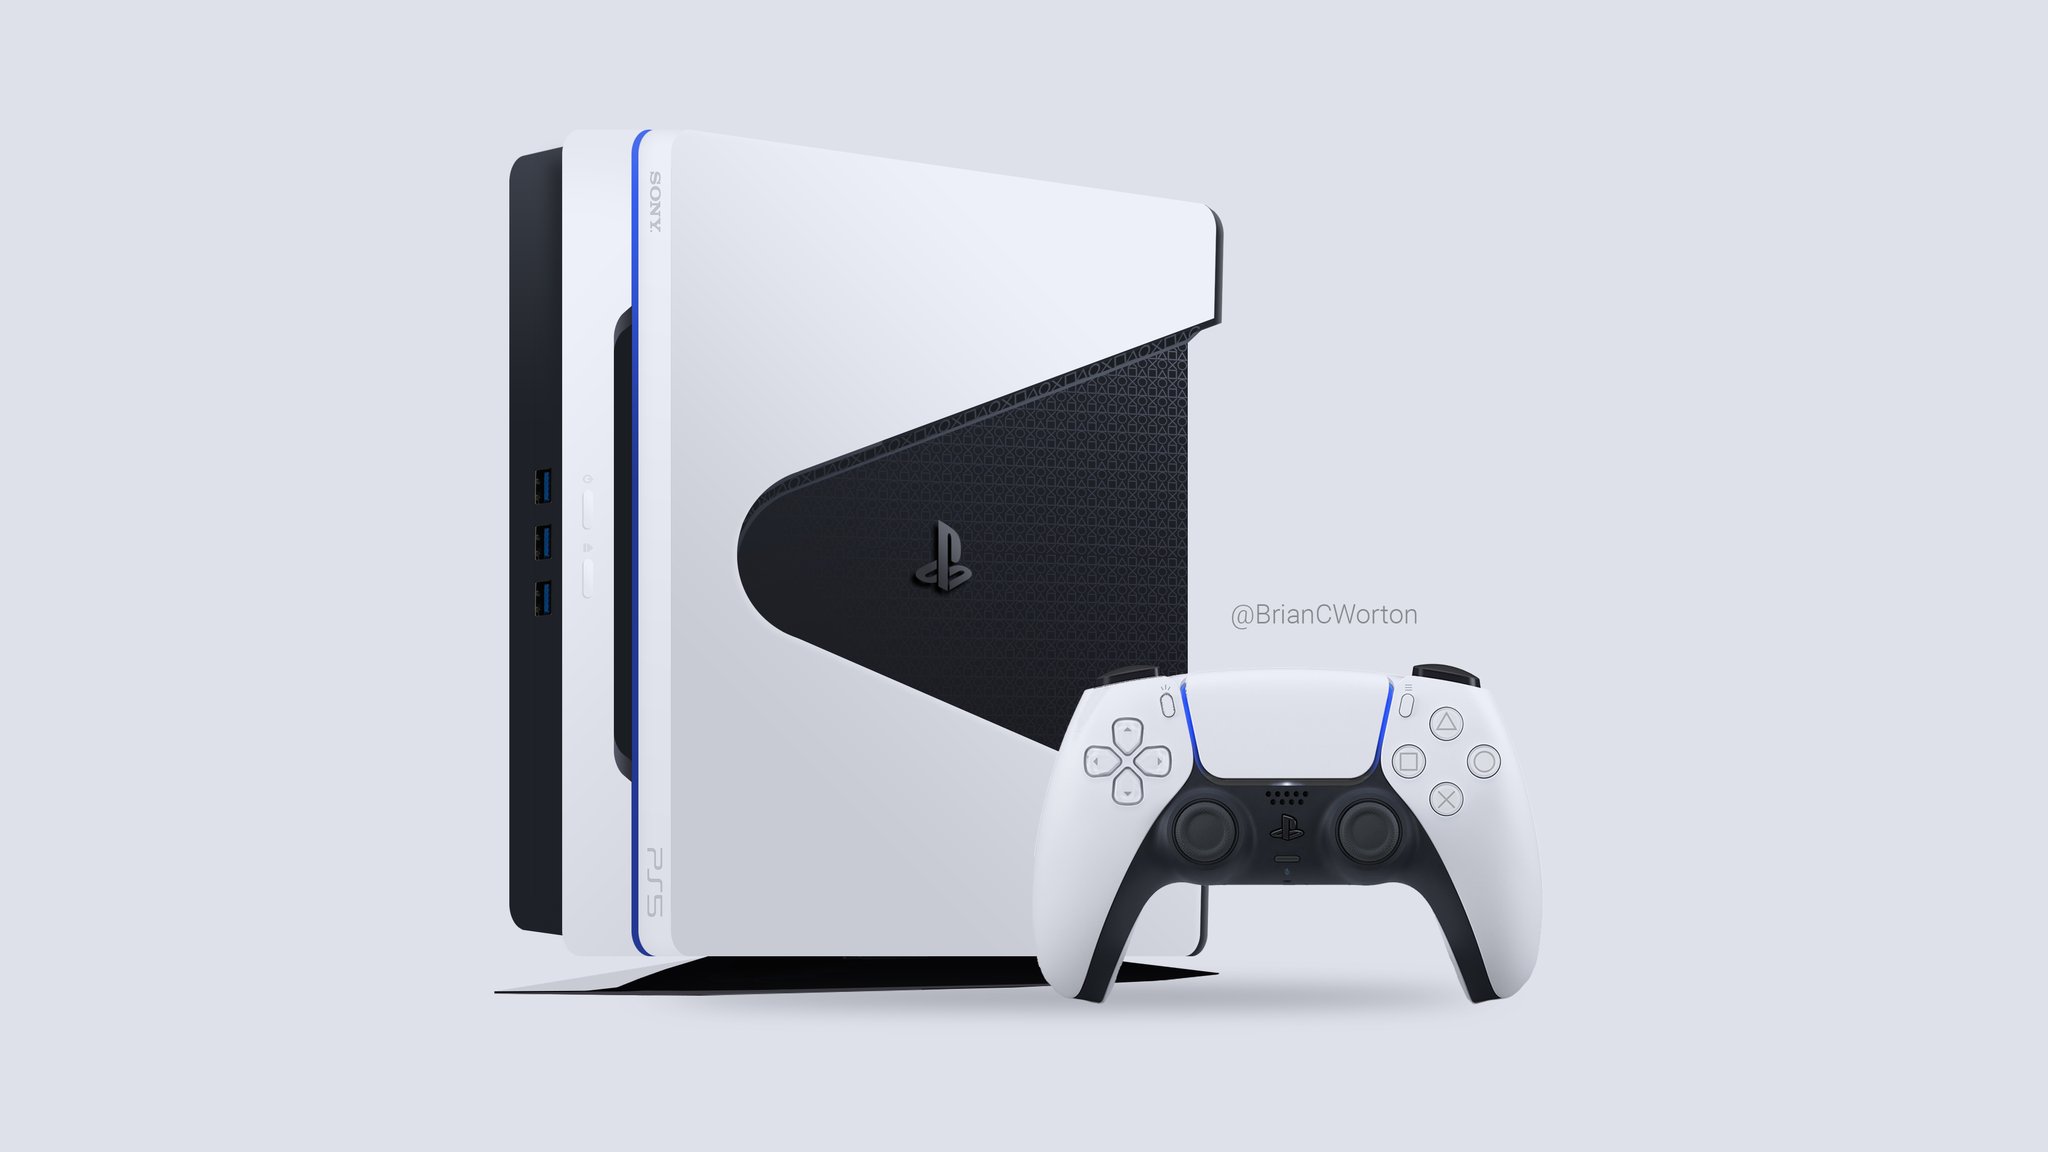 PS5 - PlayStation 5 News on Twitter: "PlayStation 5 concept design based on the DualSense controller and dev kit. 👀 Credit: @BrianCWorton #PS5 # PlayStation5… https://t.co/bKOwDuzI6s"